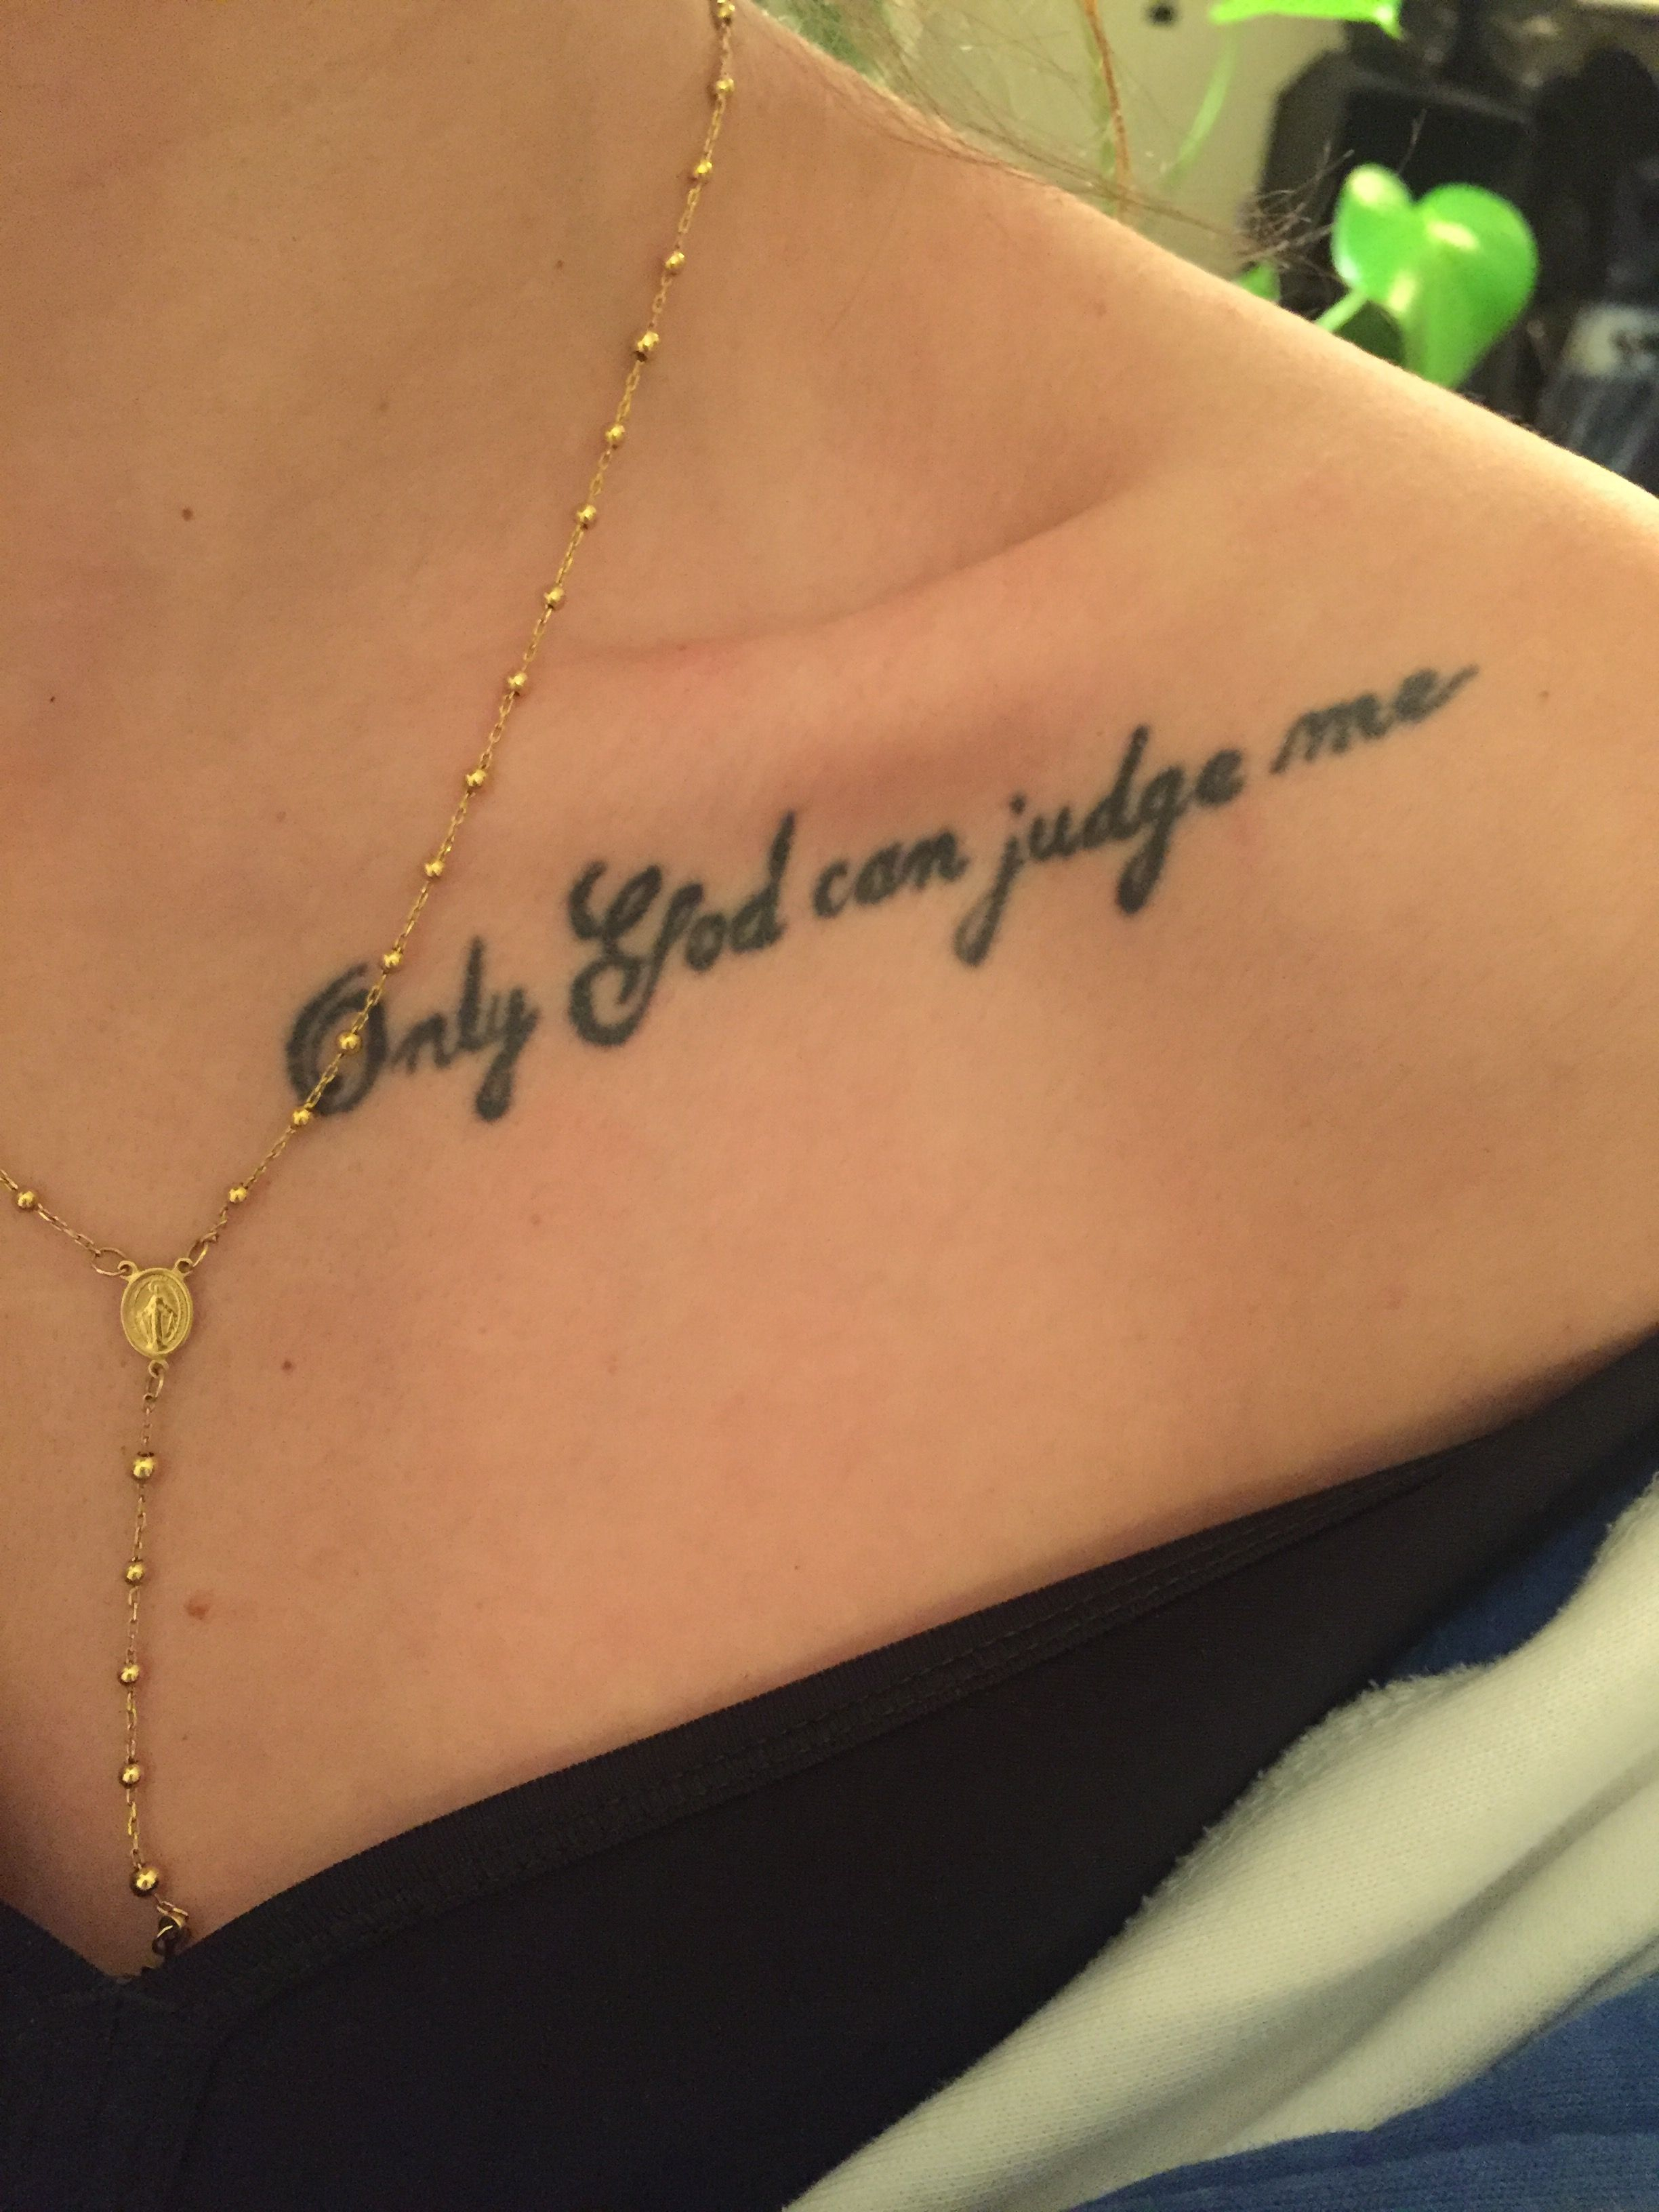 Only God Can Judge Me Tattoos I Want Tattoos God Tattoos intended for dimensions 2448 X 3264